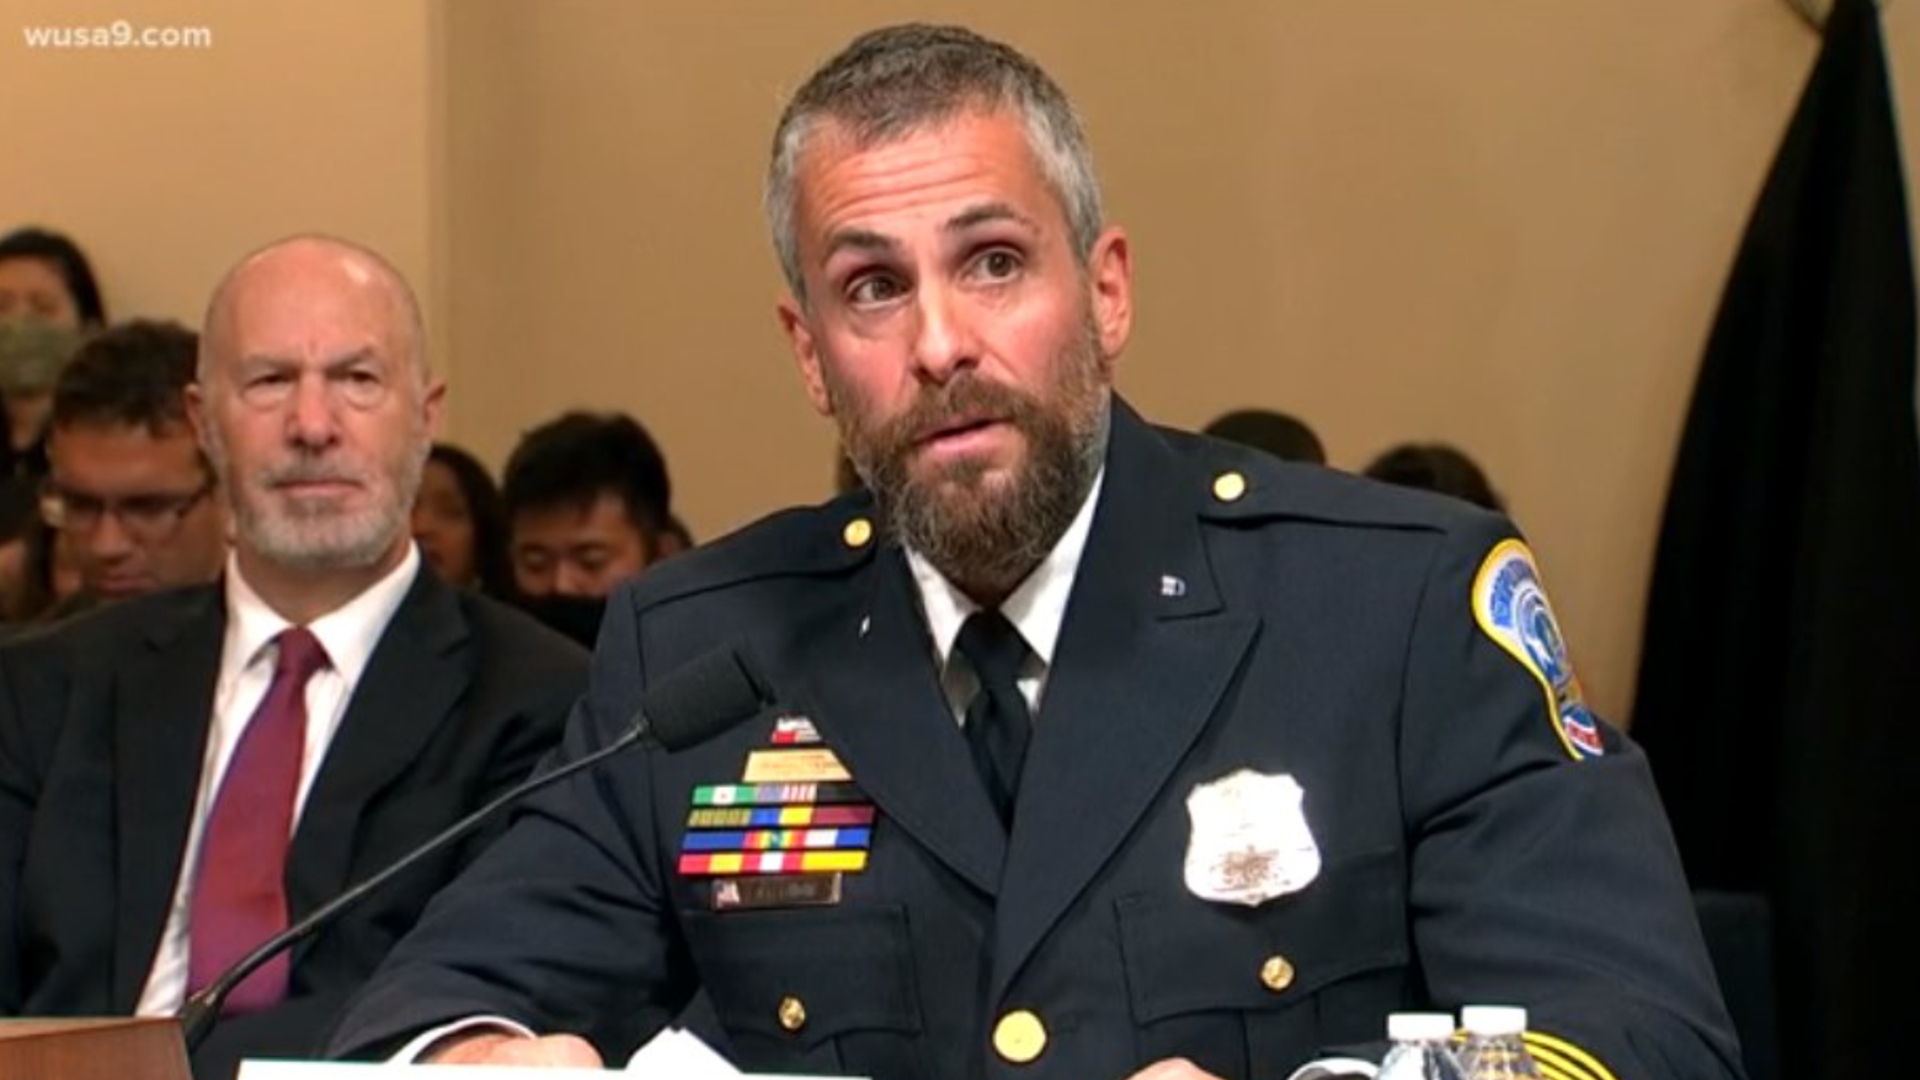 DC Police Officer Mike Fanone said the message was left while he was testifying before the House Select Committee to investigate the Jan. 6 attack.